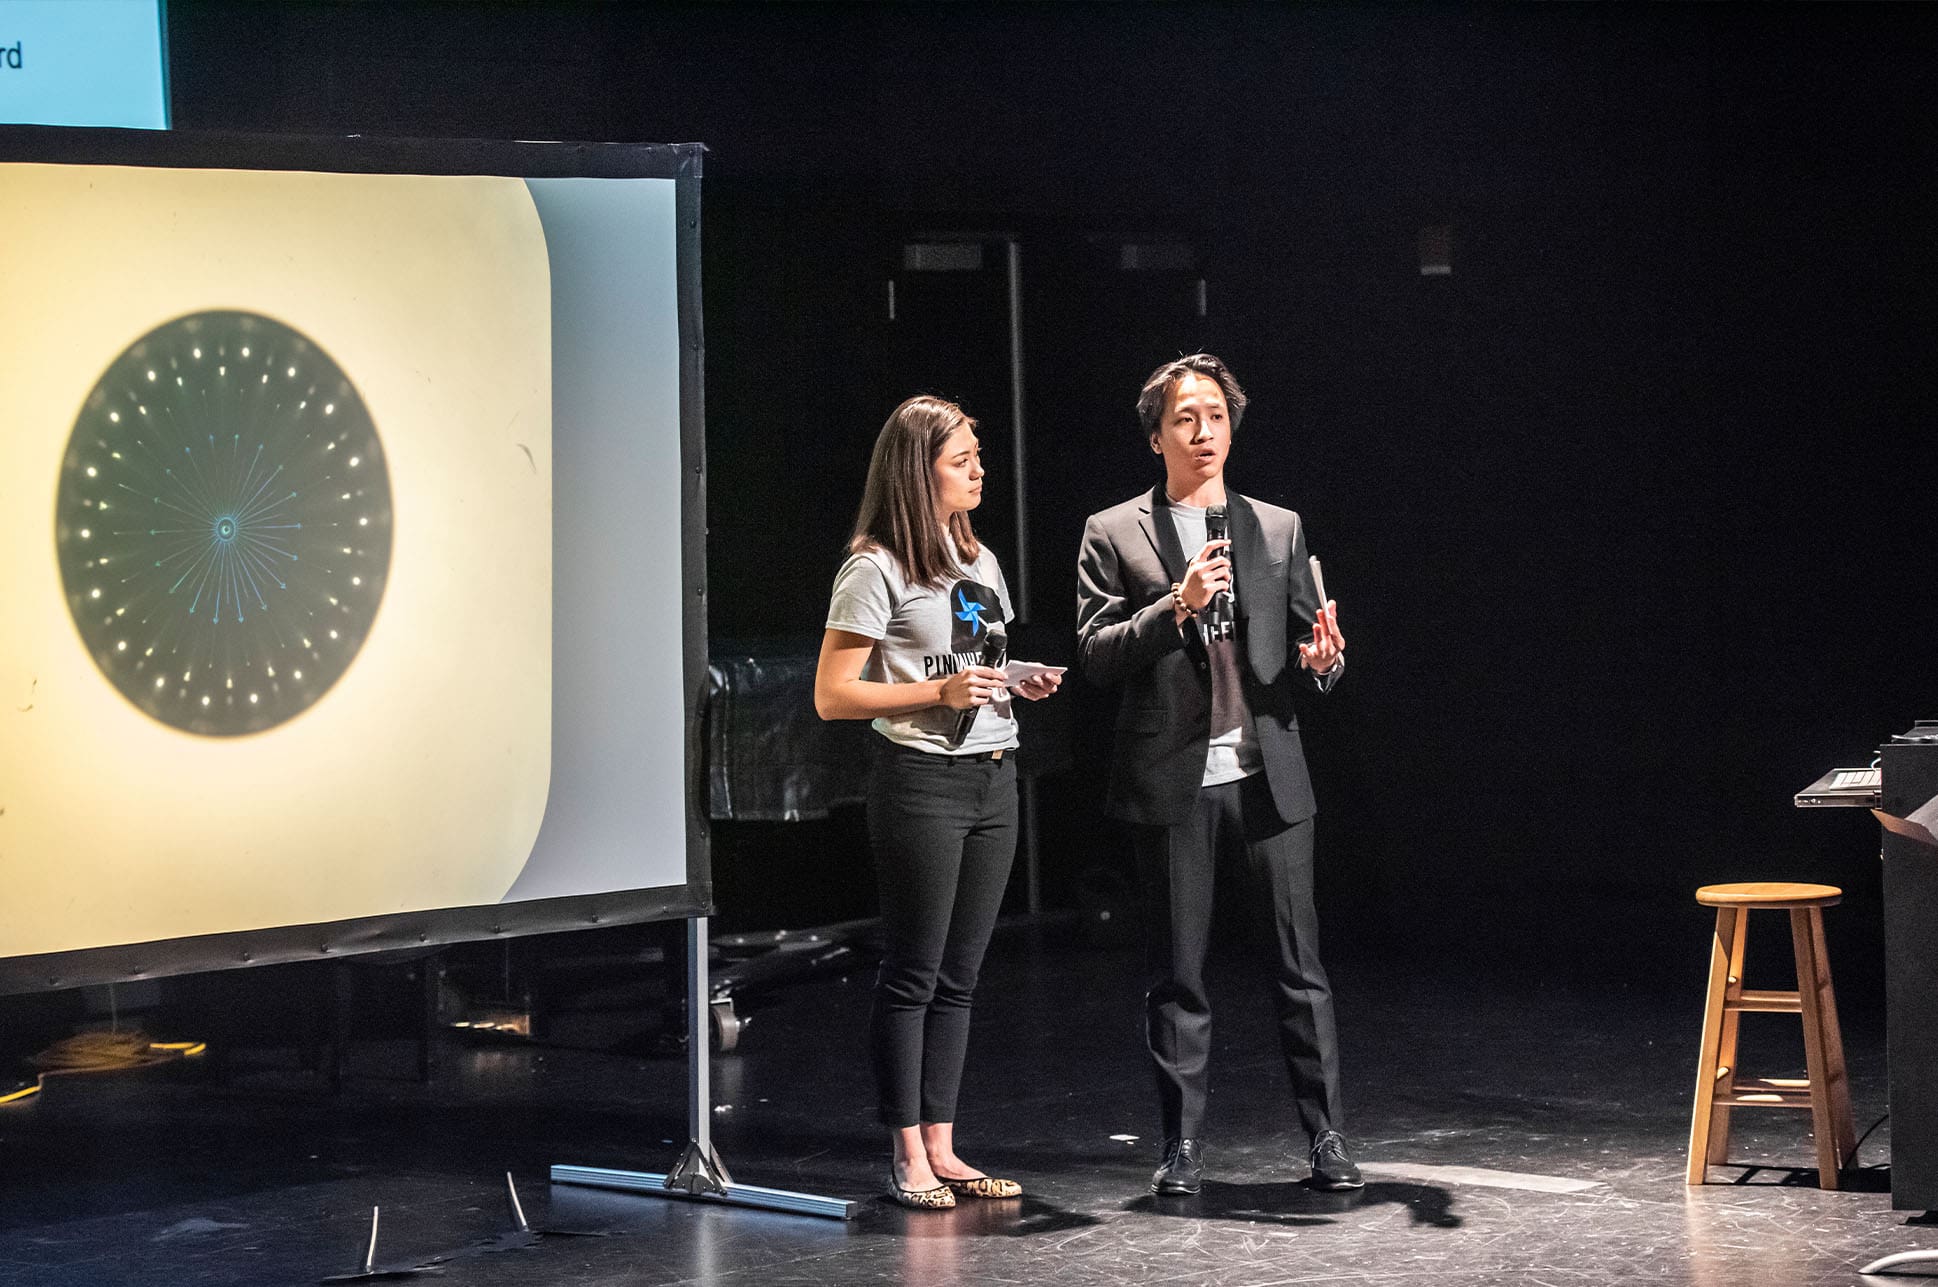 Two people making a presentation on stage.